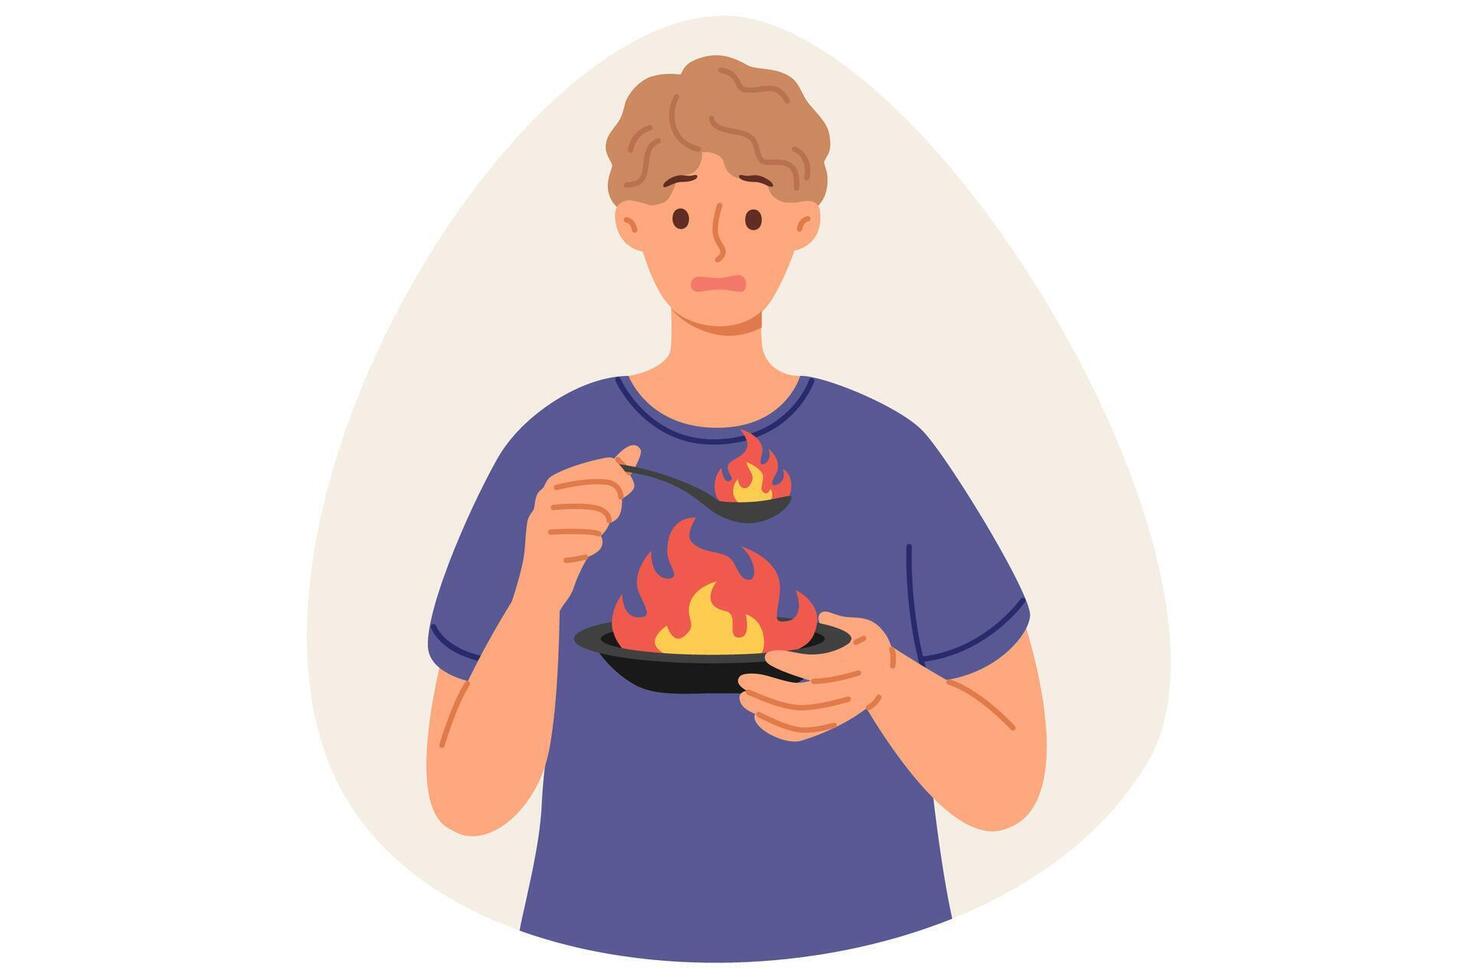 Man eats very spicy food, causing burning sensation in mouth due to overabundance of pepper, holding plate and spoon with flame. Guy eats spicy dish with spices, makes dissatisfied grimace vector